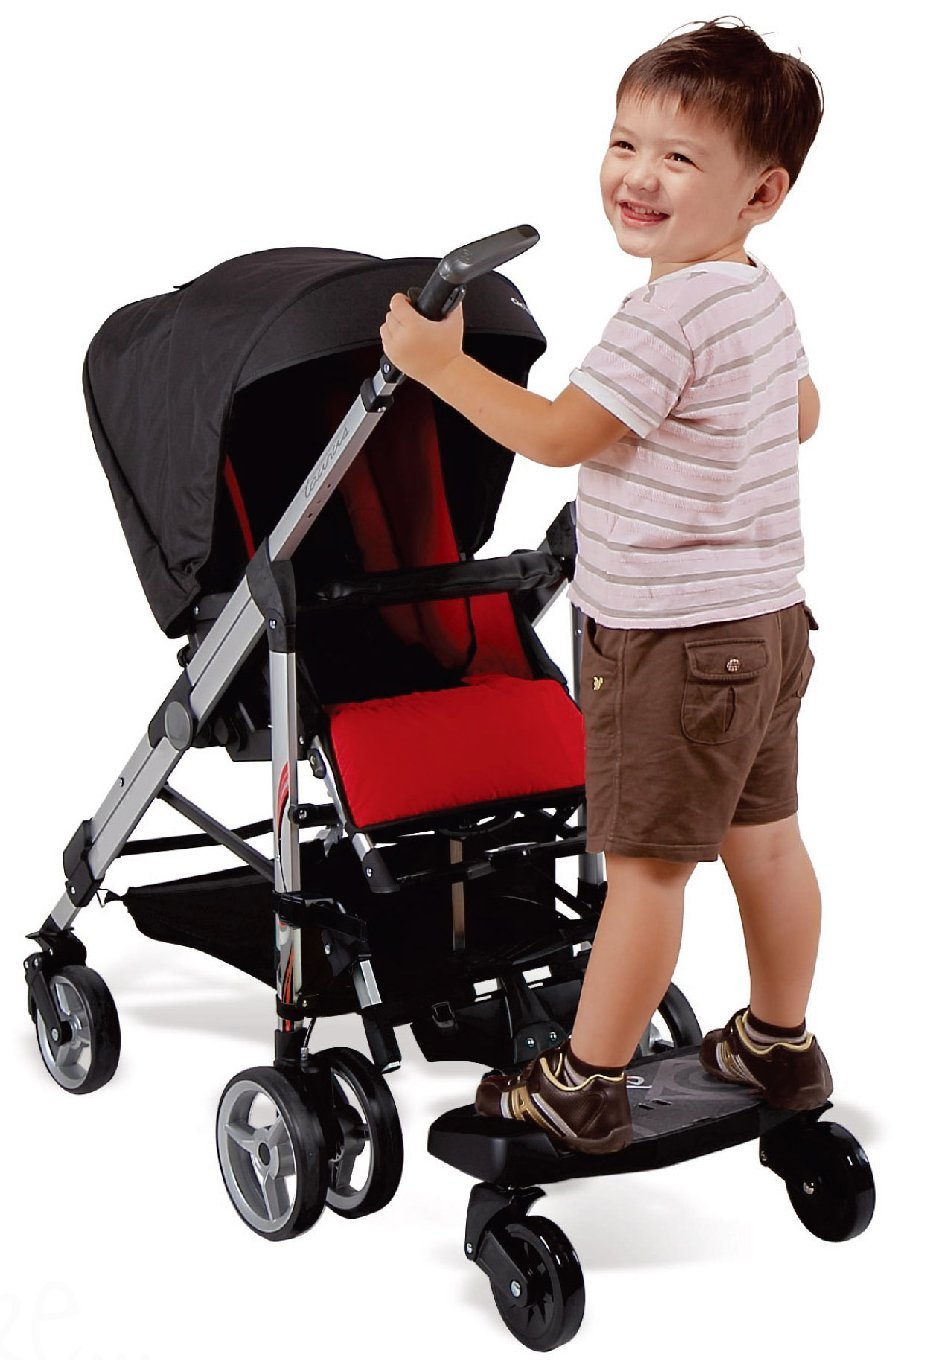 guzzie+Guss Hitch Full Suspension Ride-On Stroller Board, Compatible with All Styles of Strollers; Joggers, Prams, Full-Sized, and Umbrella Strollers, for Ages Two to Five Years, Max Weight 62 pounds